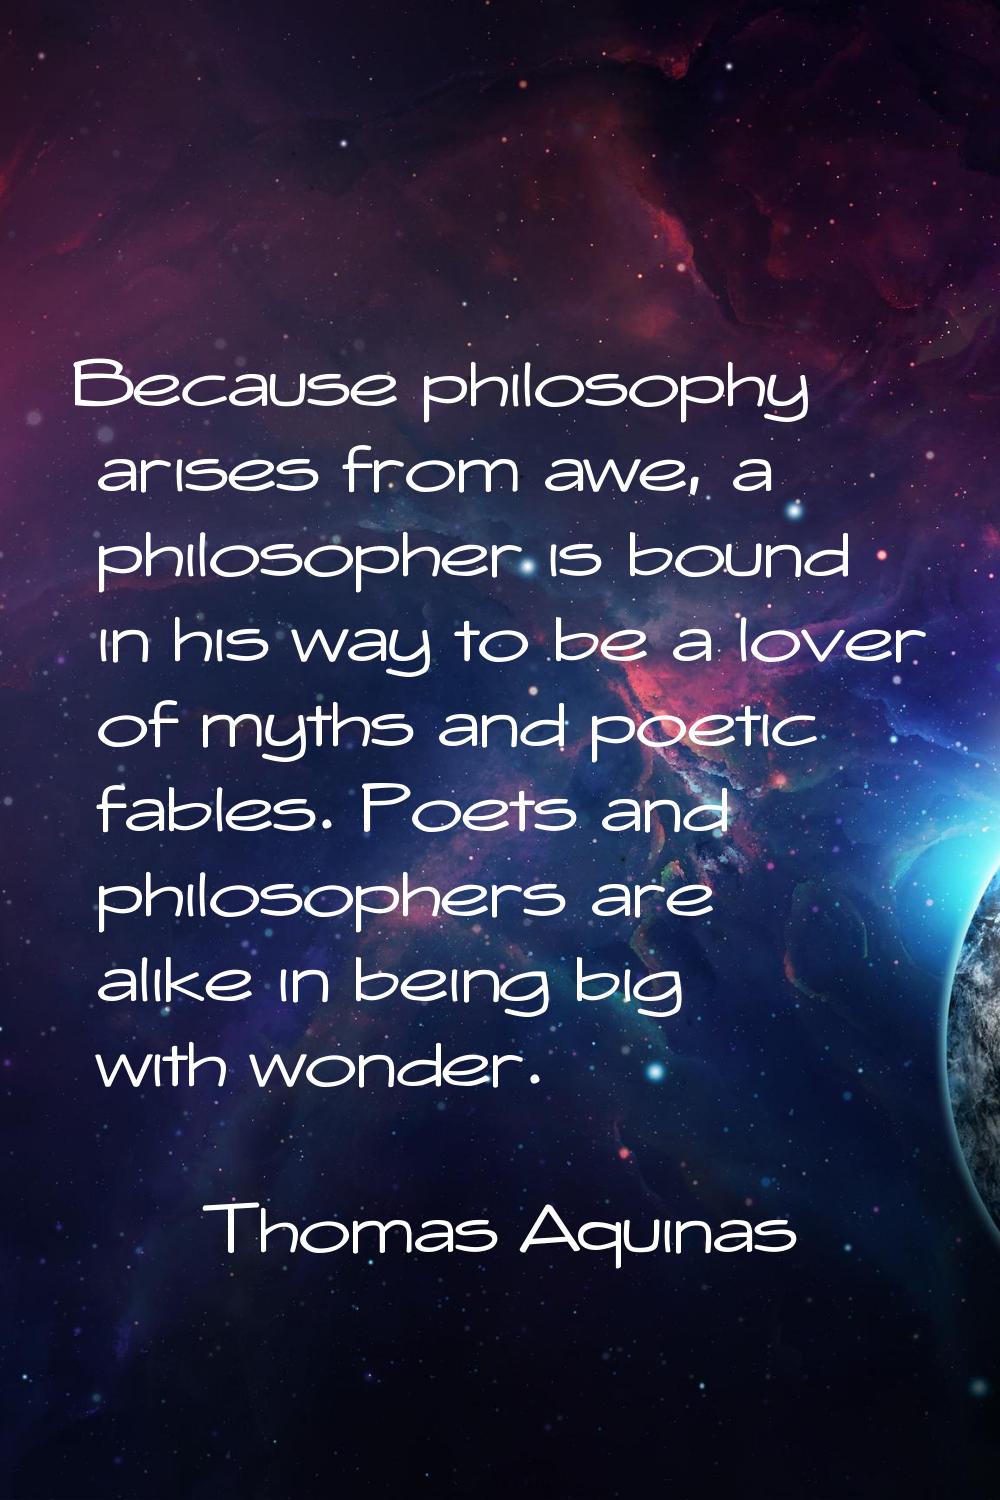 Because philosophy arises from awe, a philosopher is bound in his way to be a lover of myths and po